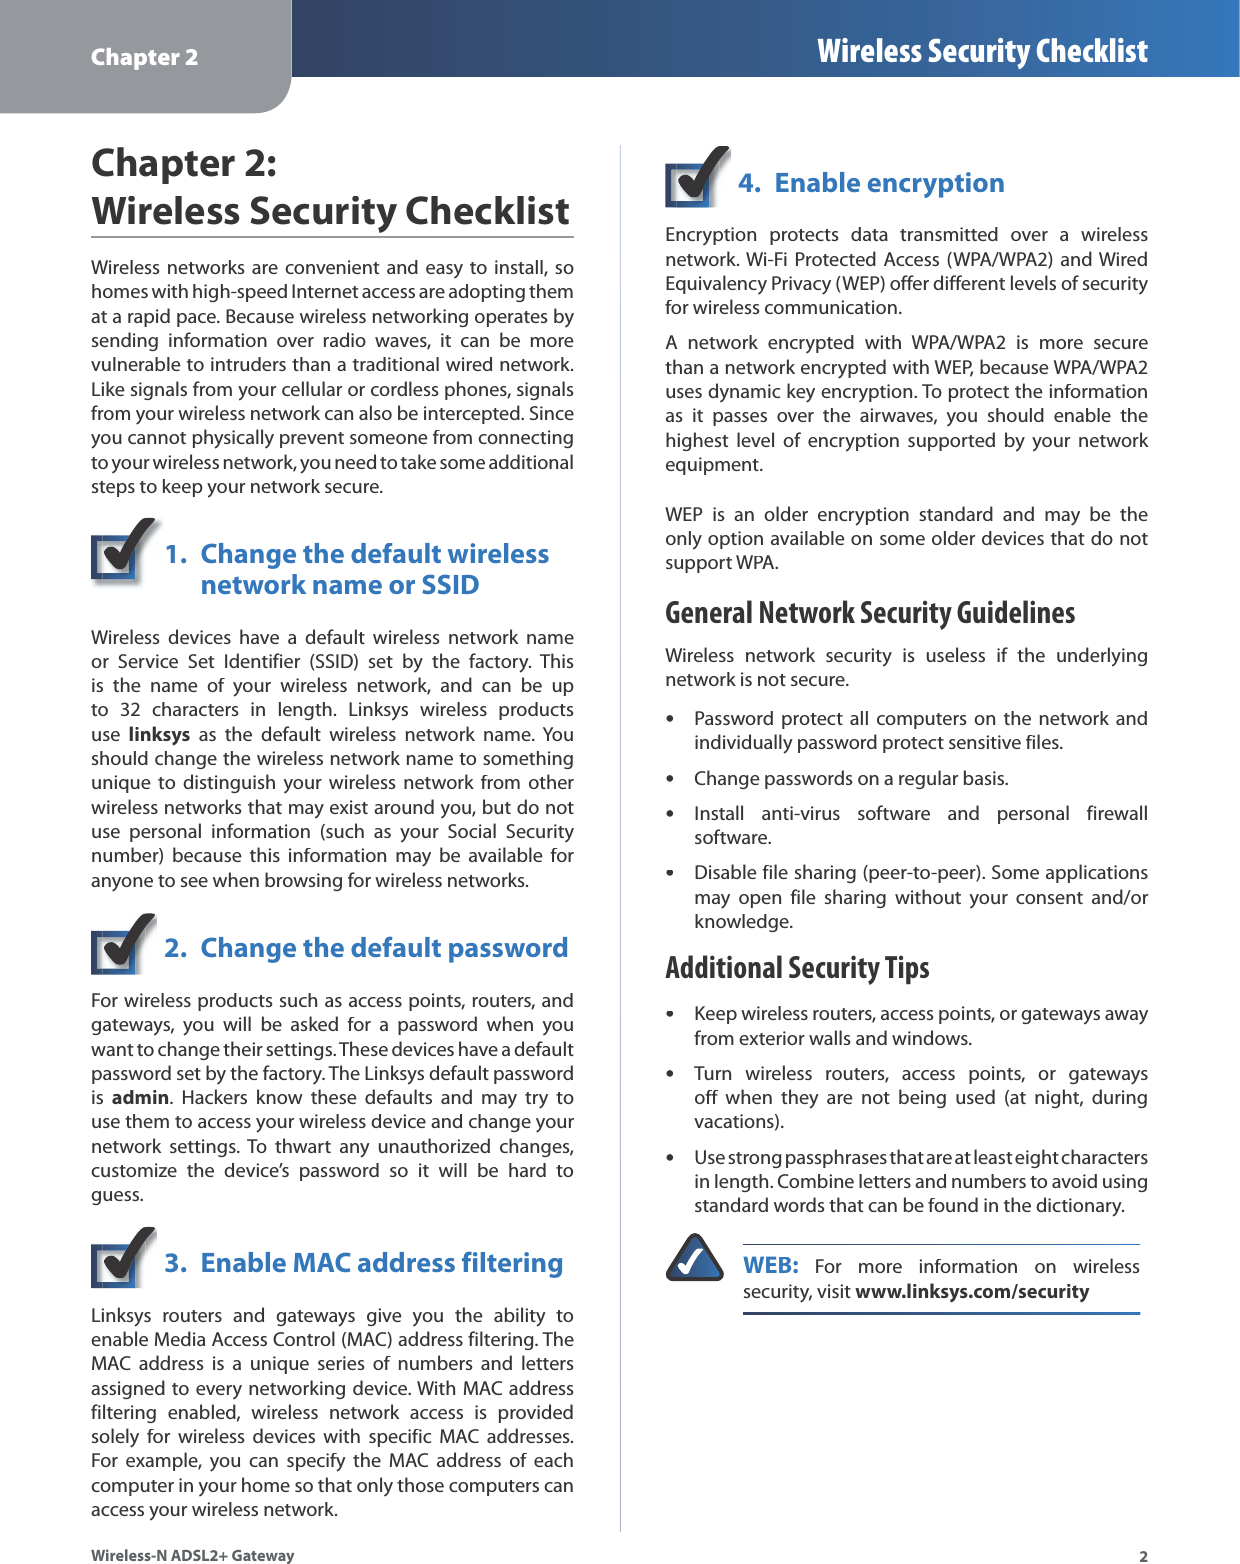 Chapter 2 Wireless Security Checklist2Wireless-N ADSL2+ GatewayChapter 2:Wireless Security ChecklistWireless networks are convenient and easy to install, so homes with high-speed Internet access are adopting them at a rapid pace. Because wireless networking operates by sending information over radio waves, it can be more vulnerable to intruders than a traditional wired network. Like signals from your cellular or cordless phones, signalsfrom your wireless network can also be intercepted. Since you cannot physically prevent someone from connecting to your wireless network, you need to take some additional steps to keep your network secure.1.Change the default wirelessnetwork name or SSIDWireless devices have a default wireless network nameor Service Set Identifier (SSID) set by the factory. This is the name of your wireless network, and can be upto 32 characters in length. Linksys wireless productsuselinksys as the default wireless network name. Youshould change the wireless network name to something unique to distinguish your wireless network from other wireless networks that may exist around you, but do not use personal information (such as your Social Securitynumber) because this information may be available for anyone to see when browsing for wireless networks.2. Change the default passwordFor wireless products such as access points, routers, and gateways, you will be asked for a password when you want to change their settings. These devices have a default password set by the factory. The Linksys default password isadmin. Hackers know these defaults and may try touse them to access your wireless device and change yournetwork settings. To thwart any unauthorized changes, customize the device’s password so it will be hard to guess.3.Enable MAC address filteringLinksys routers and gateways give you the ability to enable Media Access Control (MAC) address filtering. TheMAC address is a unique series of numbers and letters assigned to every networking device. With MAC addressfiltering enabled, wireless network access is provided solely for wireless devices with specific MAC addresses. For example, you can specify the MAC address of each computer in your home so that only those computers can access your wireless network.4. Enable encryptionEncryption protects data transmitted over a wireless network. Wi-Fi Protected Access (WPA/WPA2) and Wired Equivalency Privacy (WEP) offer different levels of security for wireless communication.A network encrypted with WPA/WPA2 is more securethan a network encrypted with WEP, because WPA/WPA2 uses dynamic key encryption. To protect the informationas it passes over the airwaves, you should enable thehighest level of encryption supported by your network equipment.WEP is an older encryption standard and may be the only option available on some older devices that do not support WPA.General Network Security GuidelinesWireless network security is useless if the underlying network is not secure.Password protect all computers on the network and individually password protect sensitive files.Change passwords on a regular basis.Install anti-virus software and personal firewallsoftware.Disable file sharing (peer-to-peer). Some applicationsmay open file sharing without your consent and/orknowledge.Additional Security TipsKeep wireless routers, access points, or gateways awayfrom exterior walls and windows.Turn wireless routers, access points, or gatewaysoff when they are not being used (at night, during vacations).Use strong passphrases that are at least eight characters in length. Combine letters and numbers to avoid usingstandard words that can be found in the dictionary. WEB: For more information on wireless security, visit www.linksys.com/security•••••••